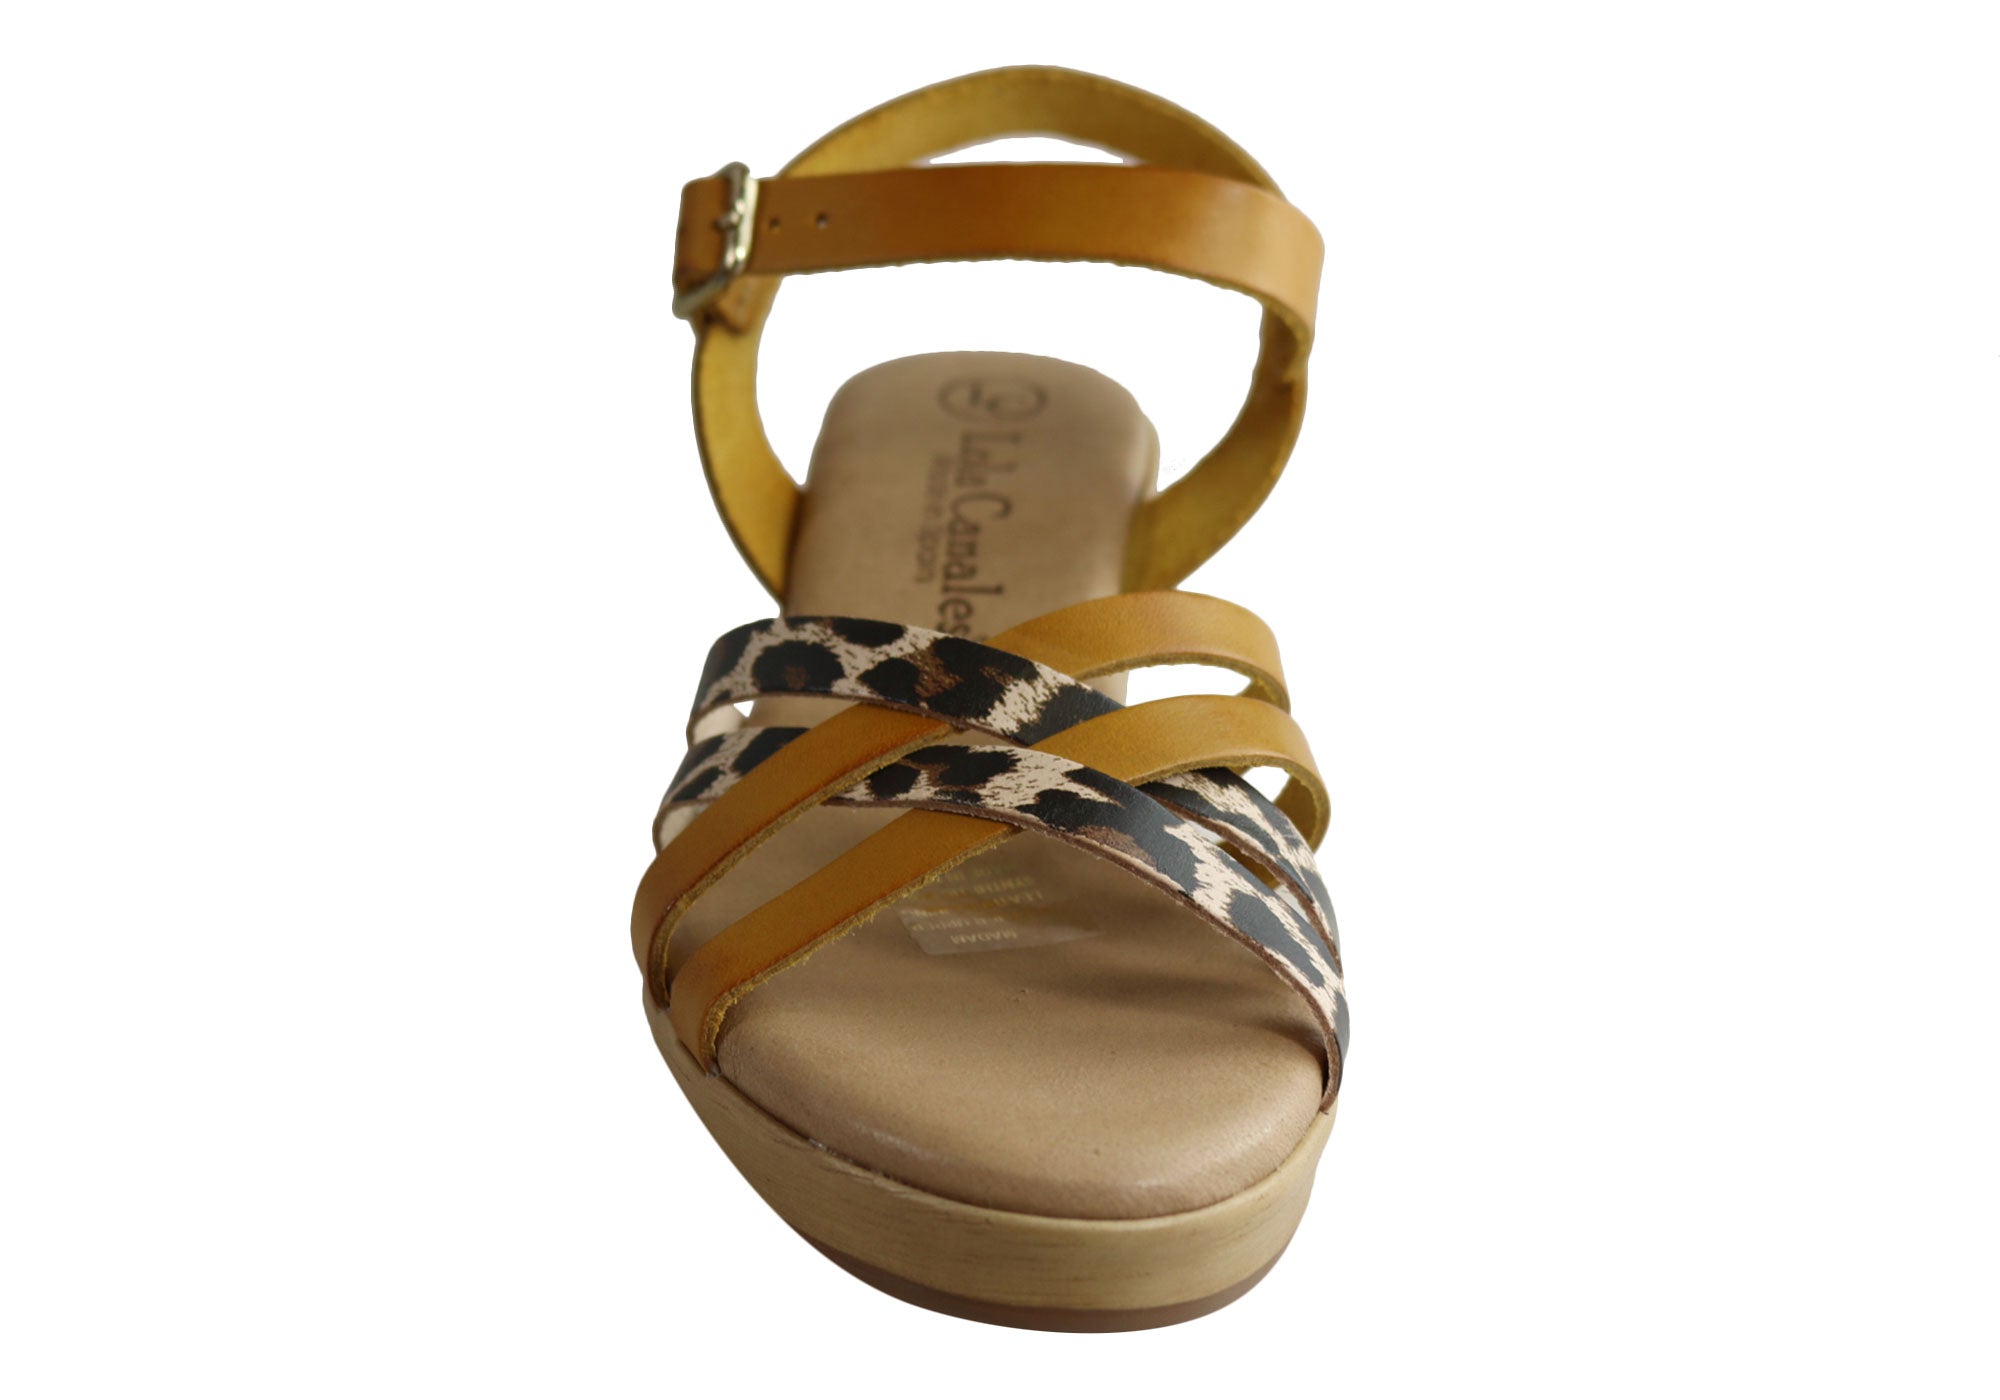 Lola Canales Madam Womens Comfortable Leather Sandals Made In Spain